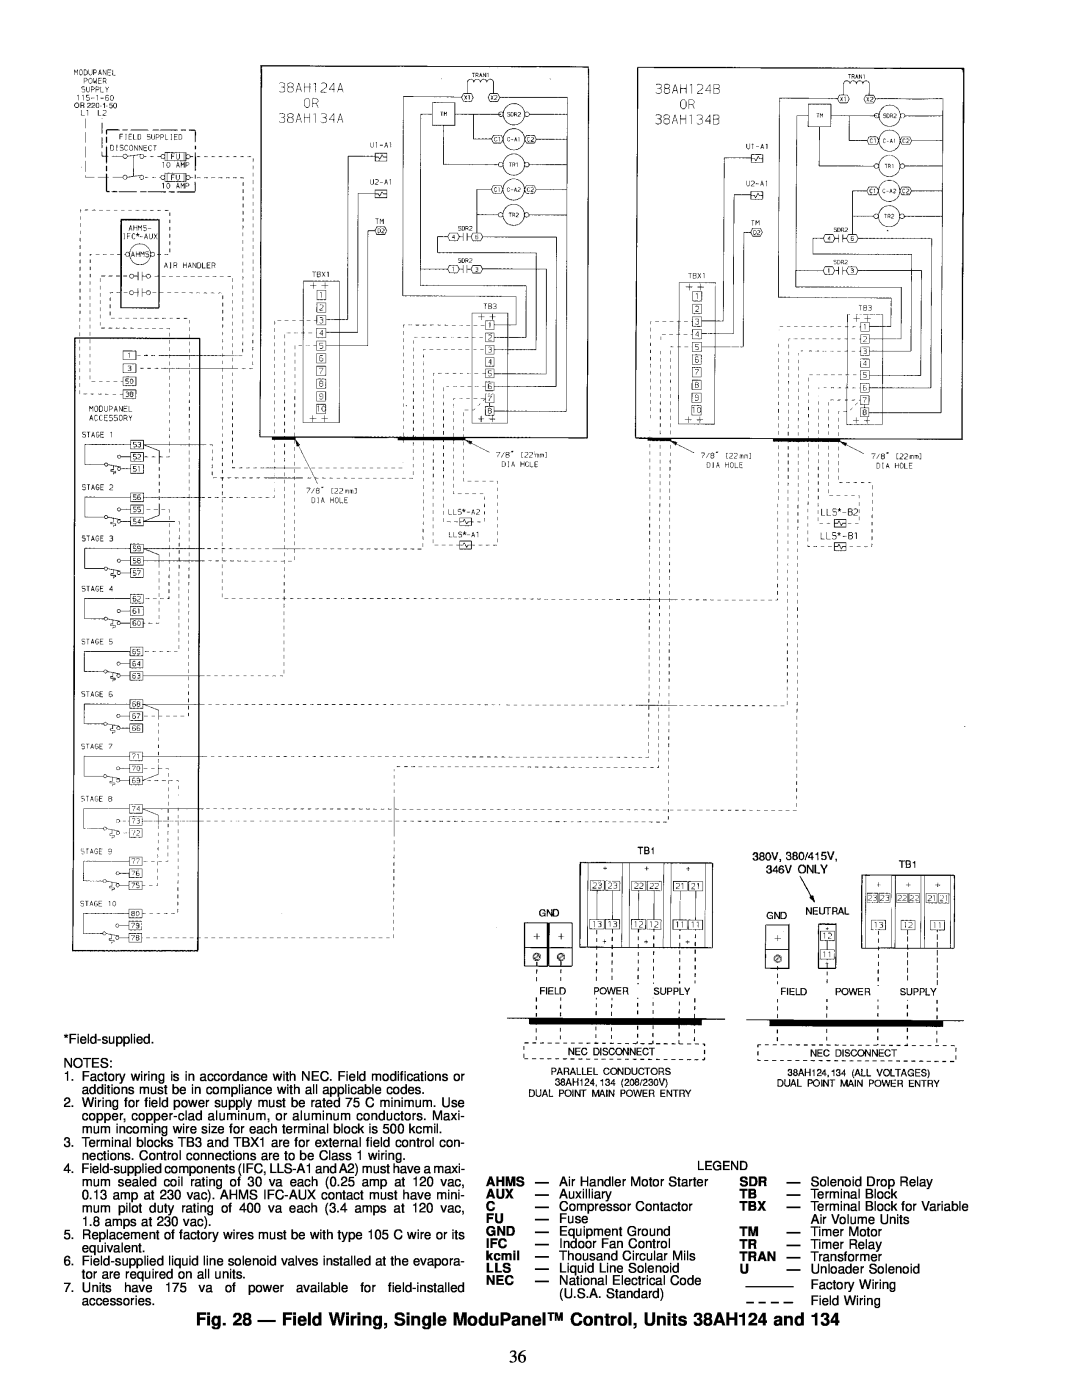 Carrier 38AH044-084 specifications Field-supplied NOTES 